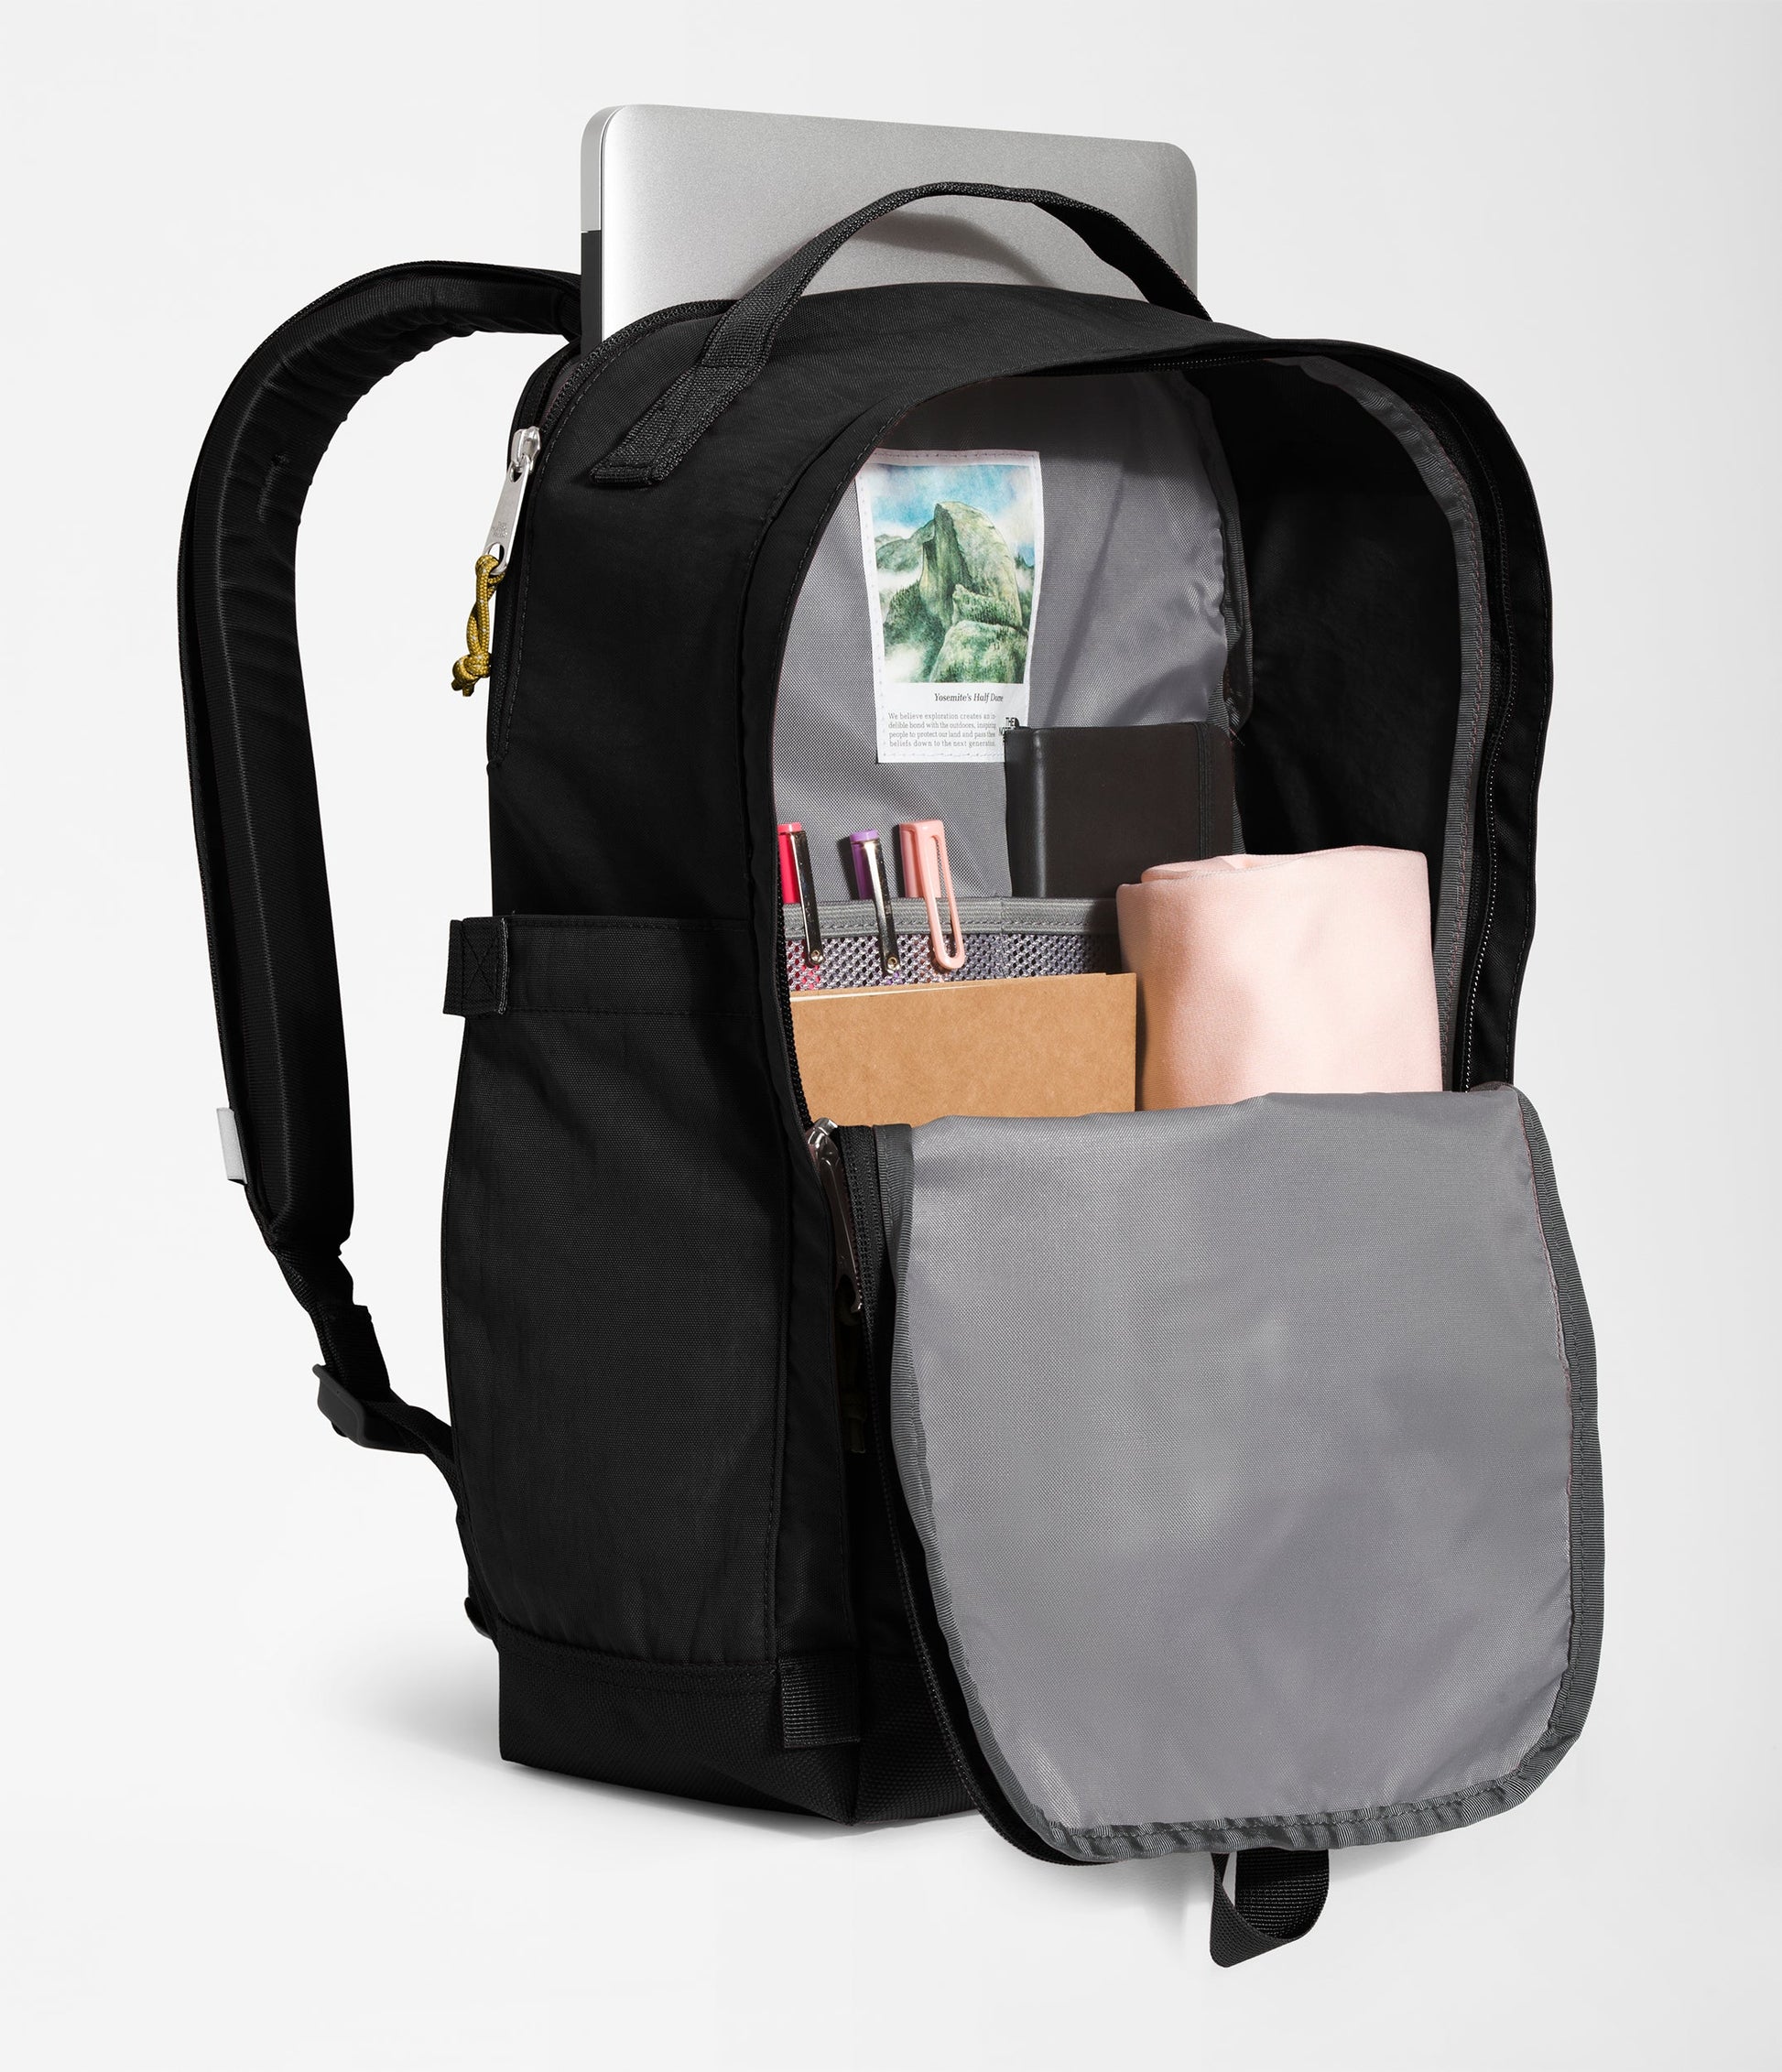 The North Face Berkeley Daypack